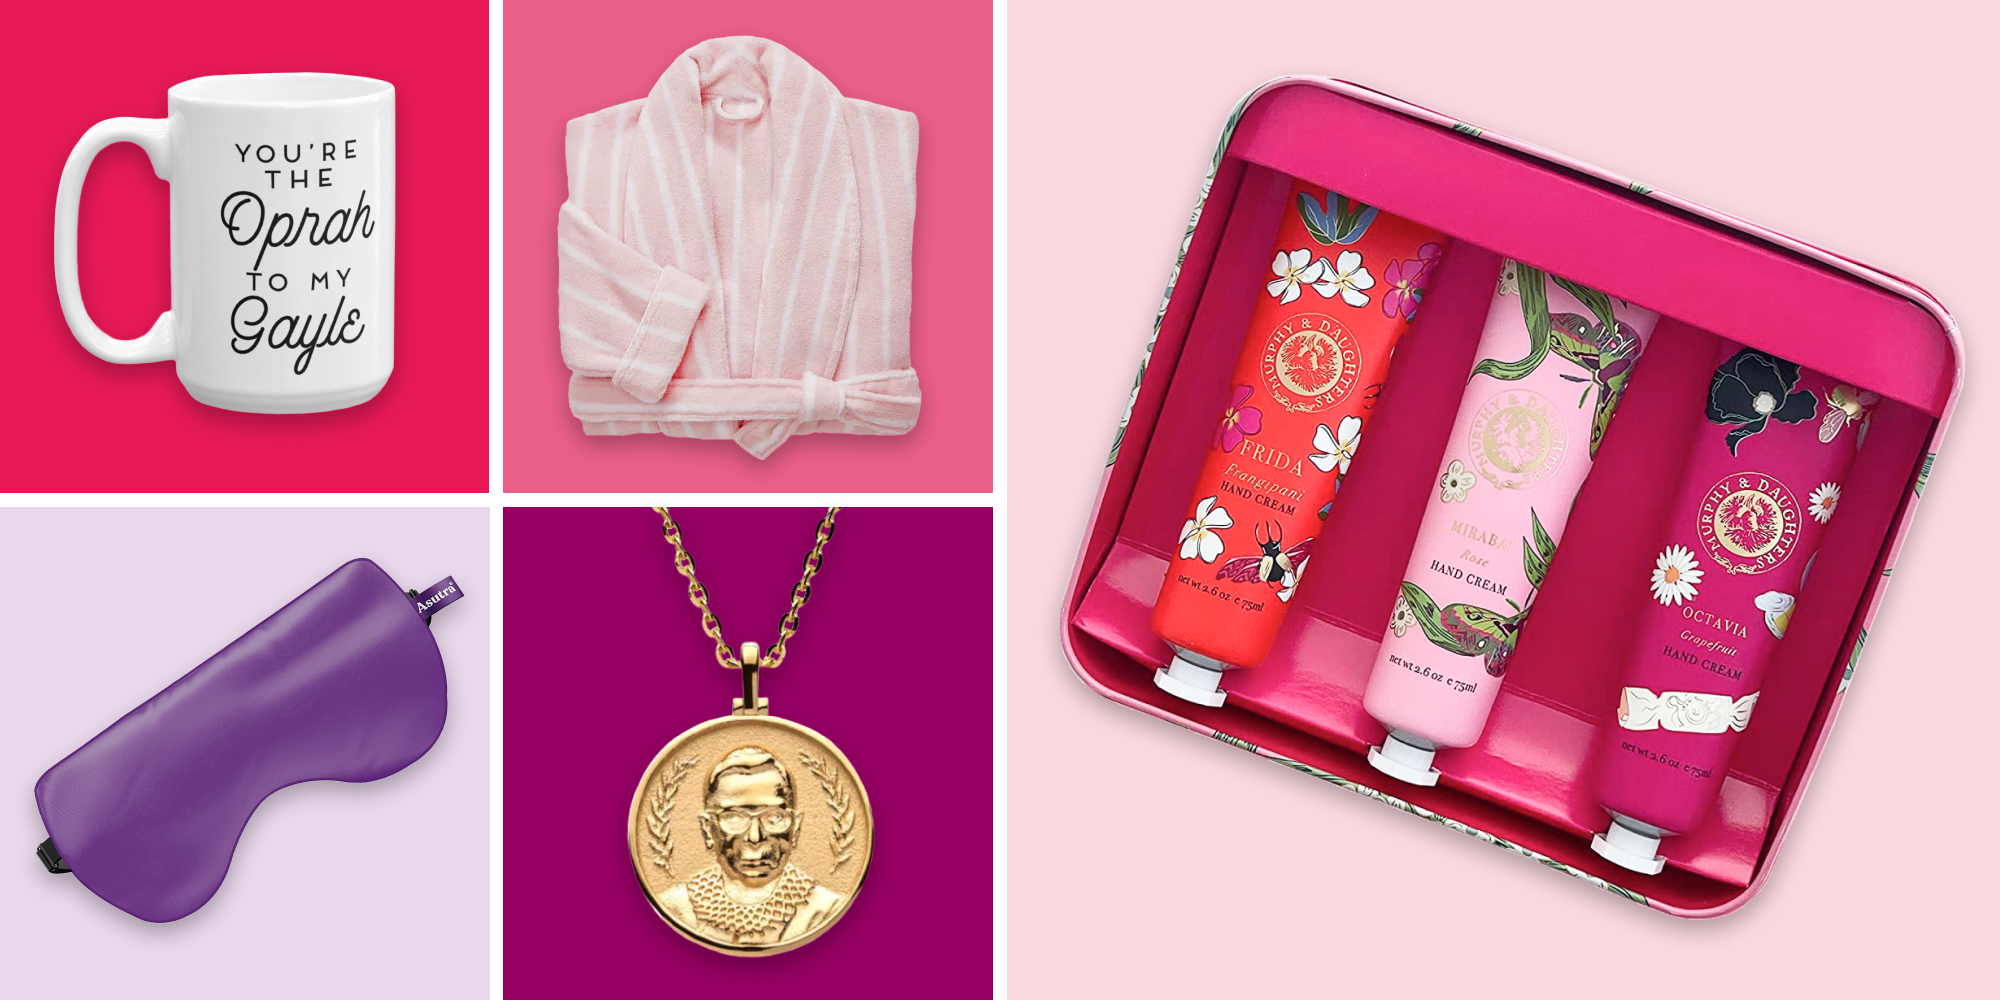 32 Creative Galentine’s Day Gift Ideas for Your Best Friend